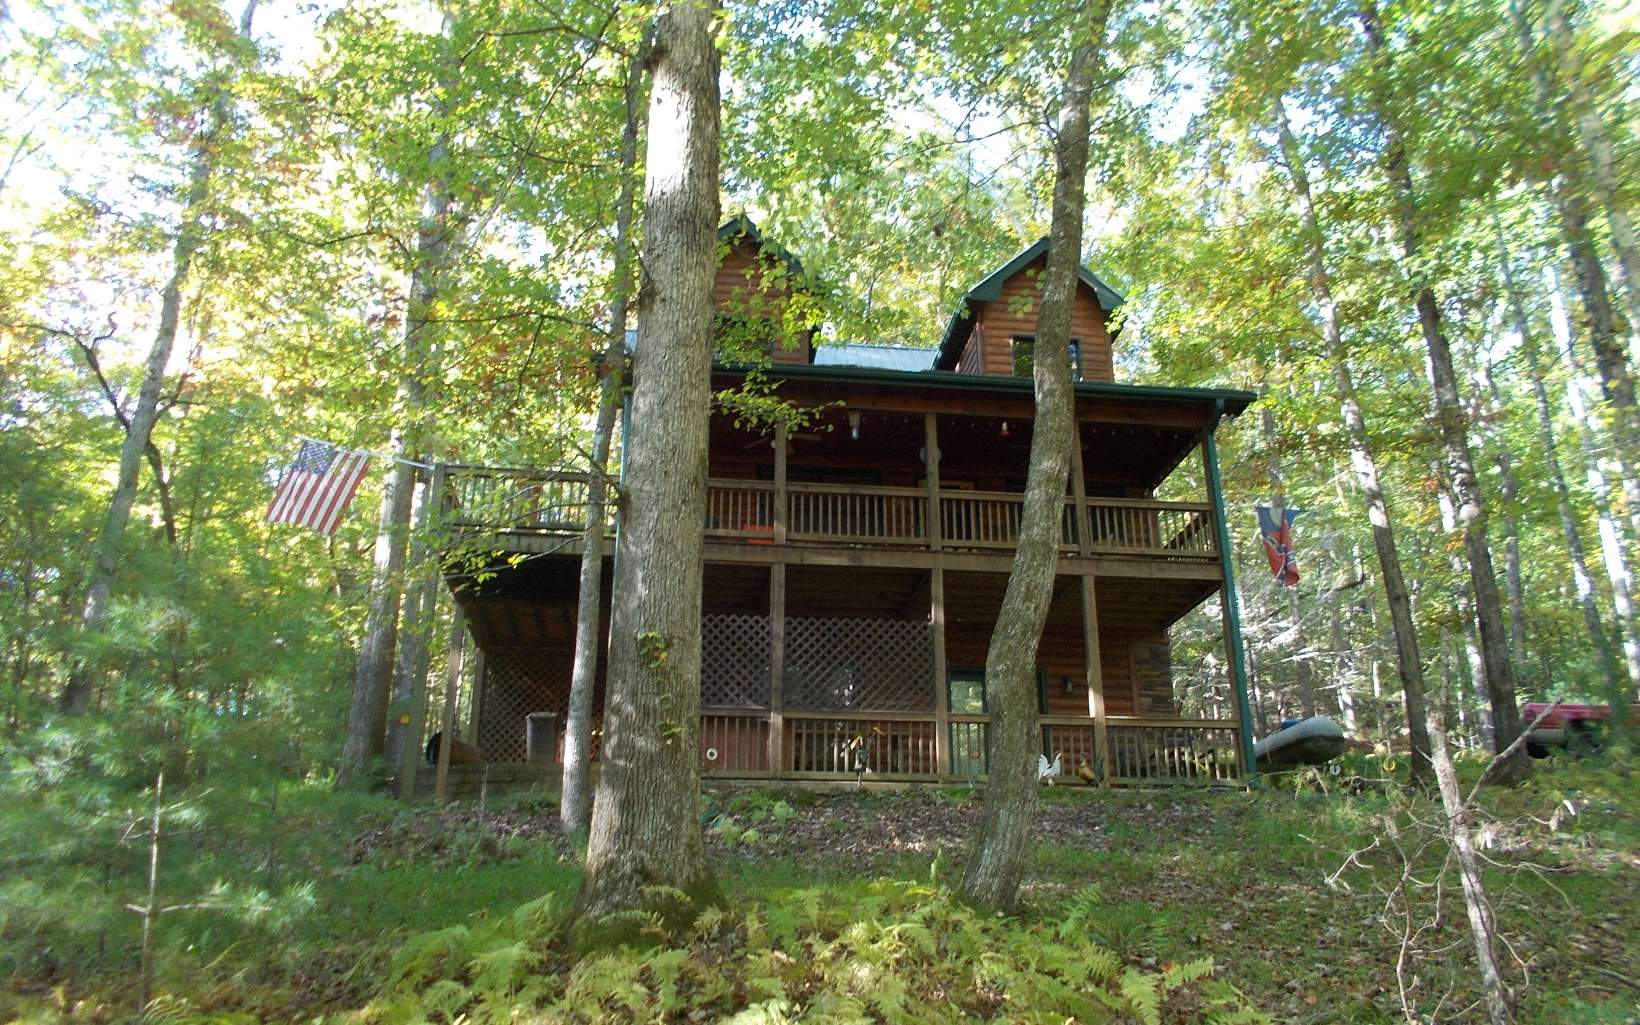 LOCATION*CABIN*LOCATION*USFS*LOCATION*ASKA ADVENTURE AREA*FURNISHED*2 LOTS* This cozy cabin package has everything you need. Located in Aska adventure area you are close to hiking trails, toccoa river, trophy trout streams, clay shooting course, tubing, hiking/hunting in your own backyard in the USFS, resturants and of course Downtown Blue Ridge. This property checks off the boxes coming completely furnished (Except some personal items), great location, additional lot with firepit (both lots border USFS), stocked ponds thoughout the community for owner use and a circle drive !